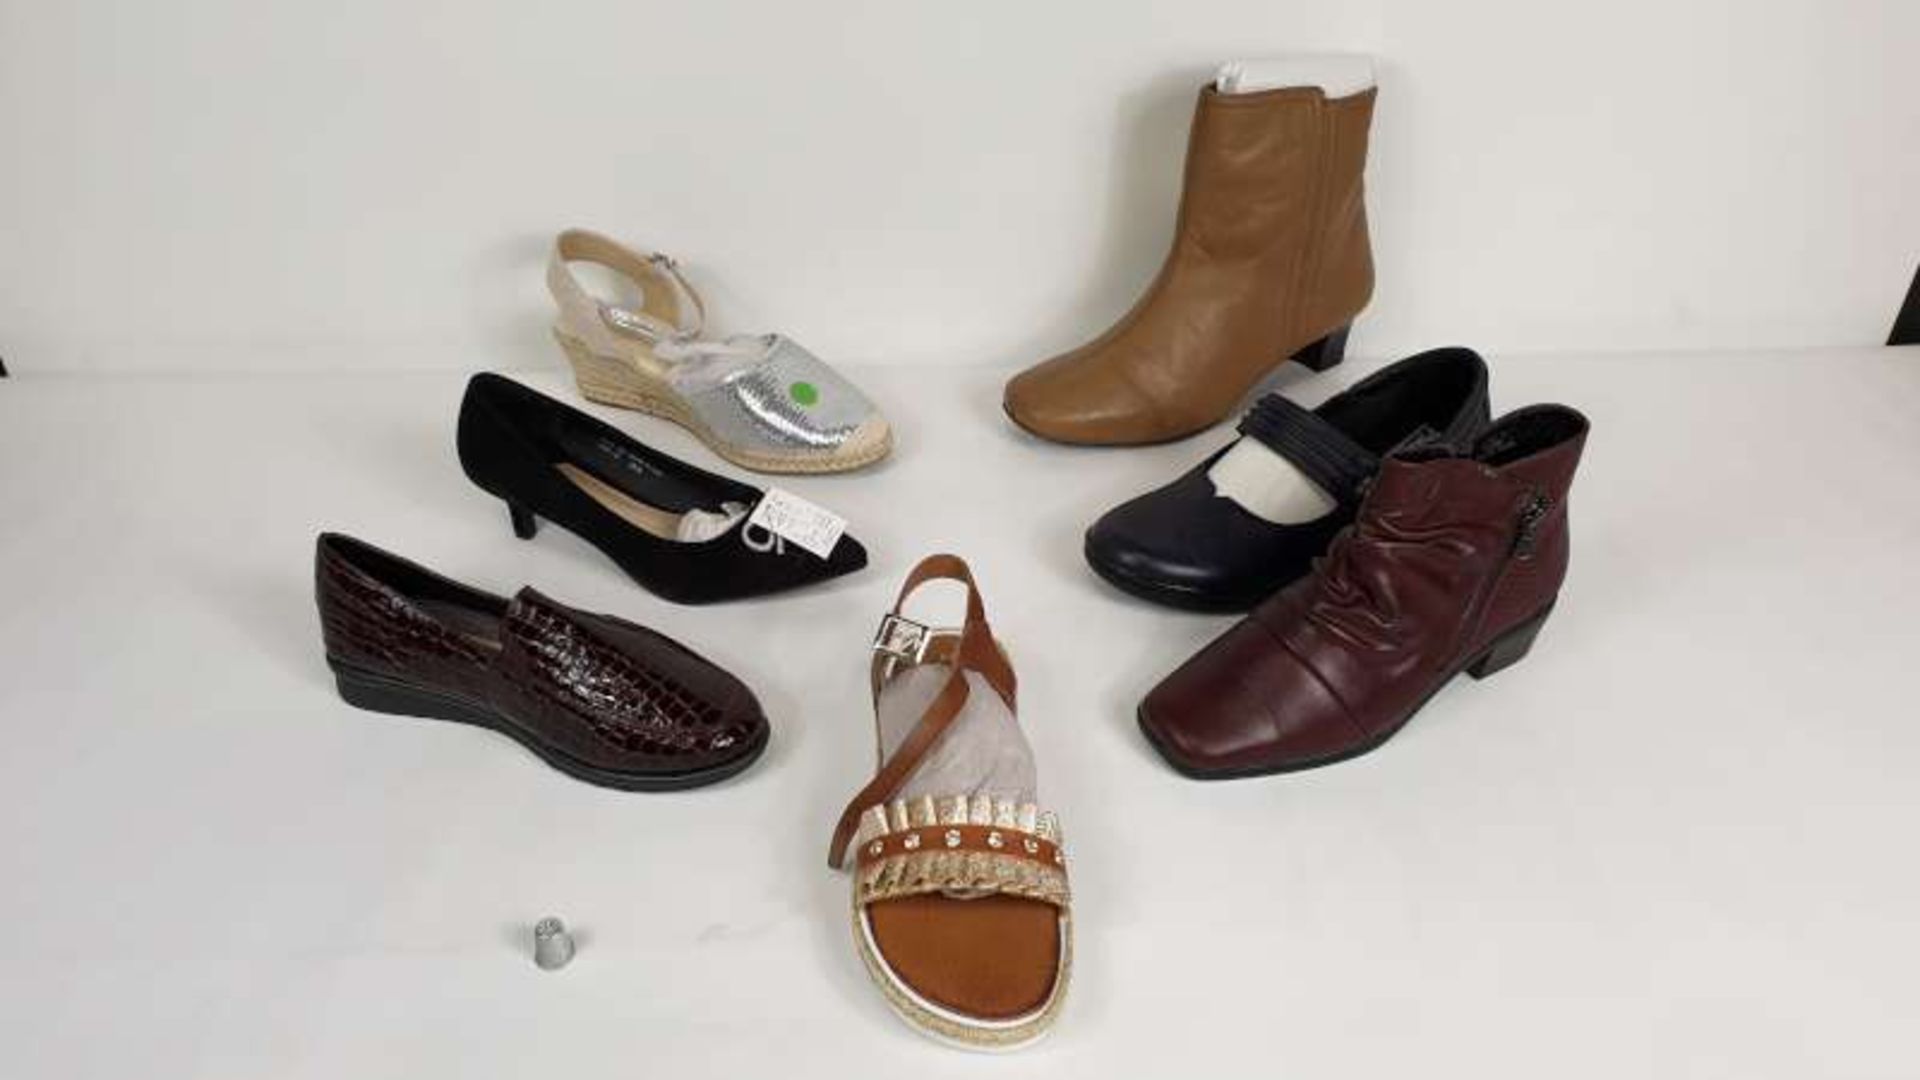 40 X PAIRS OF SHOES IN VARIOUS STYLES / COLOURS / SIZES